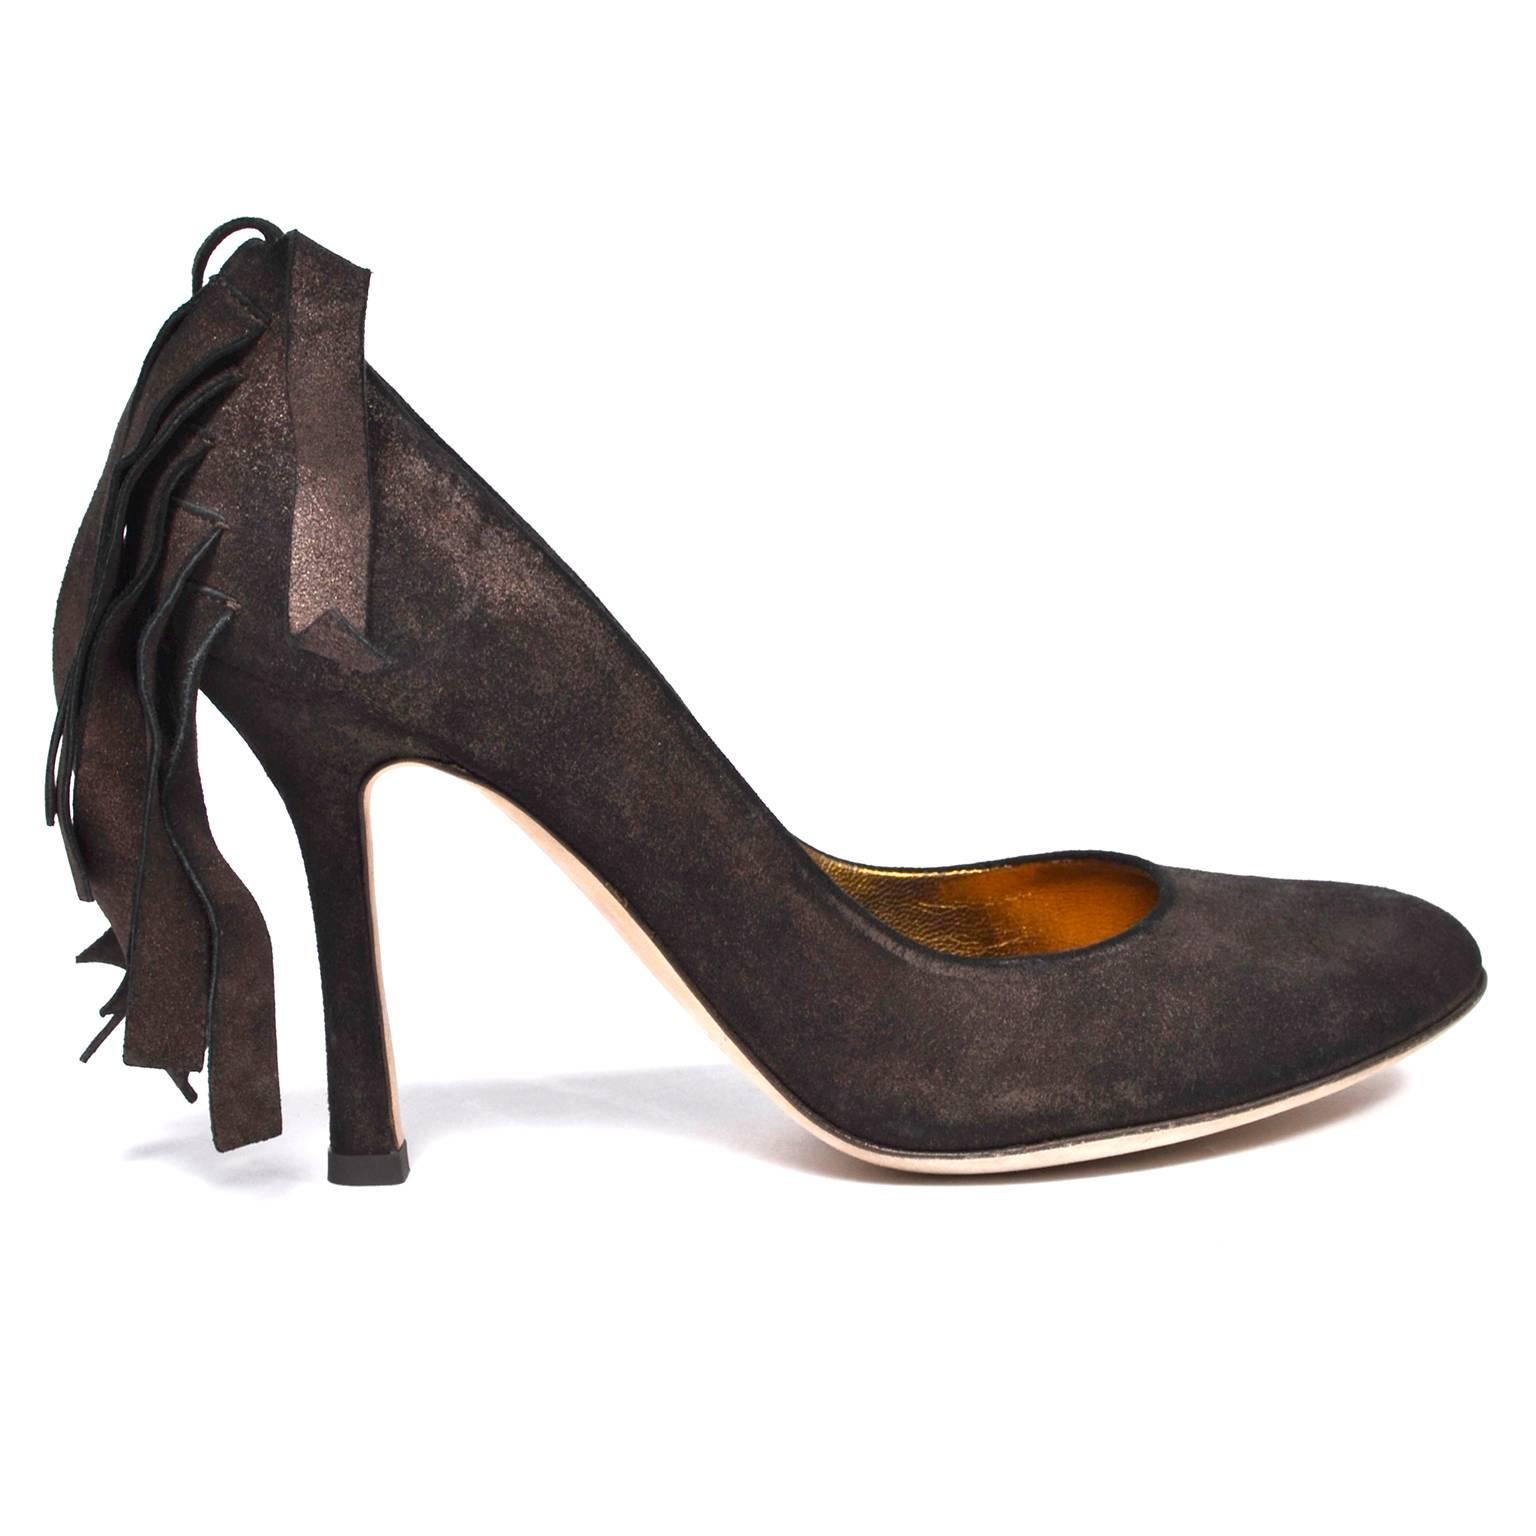 These are fabulous DSquared2 brown suede heels with a slight metallic sheen and copper leather lining. These pumps have a rounded toe and suede fringe tassels cascading in layers down the back of the heel. They look to have been worn once, and show